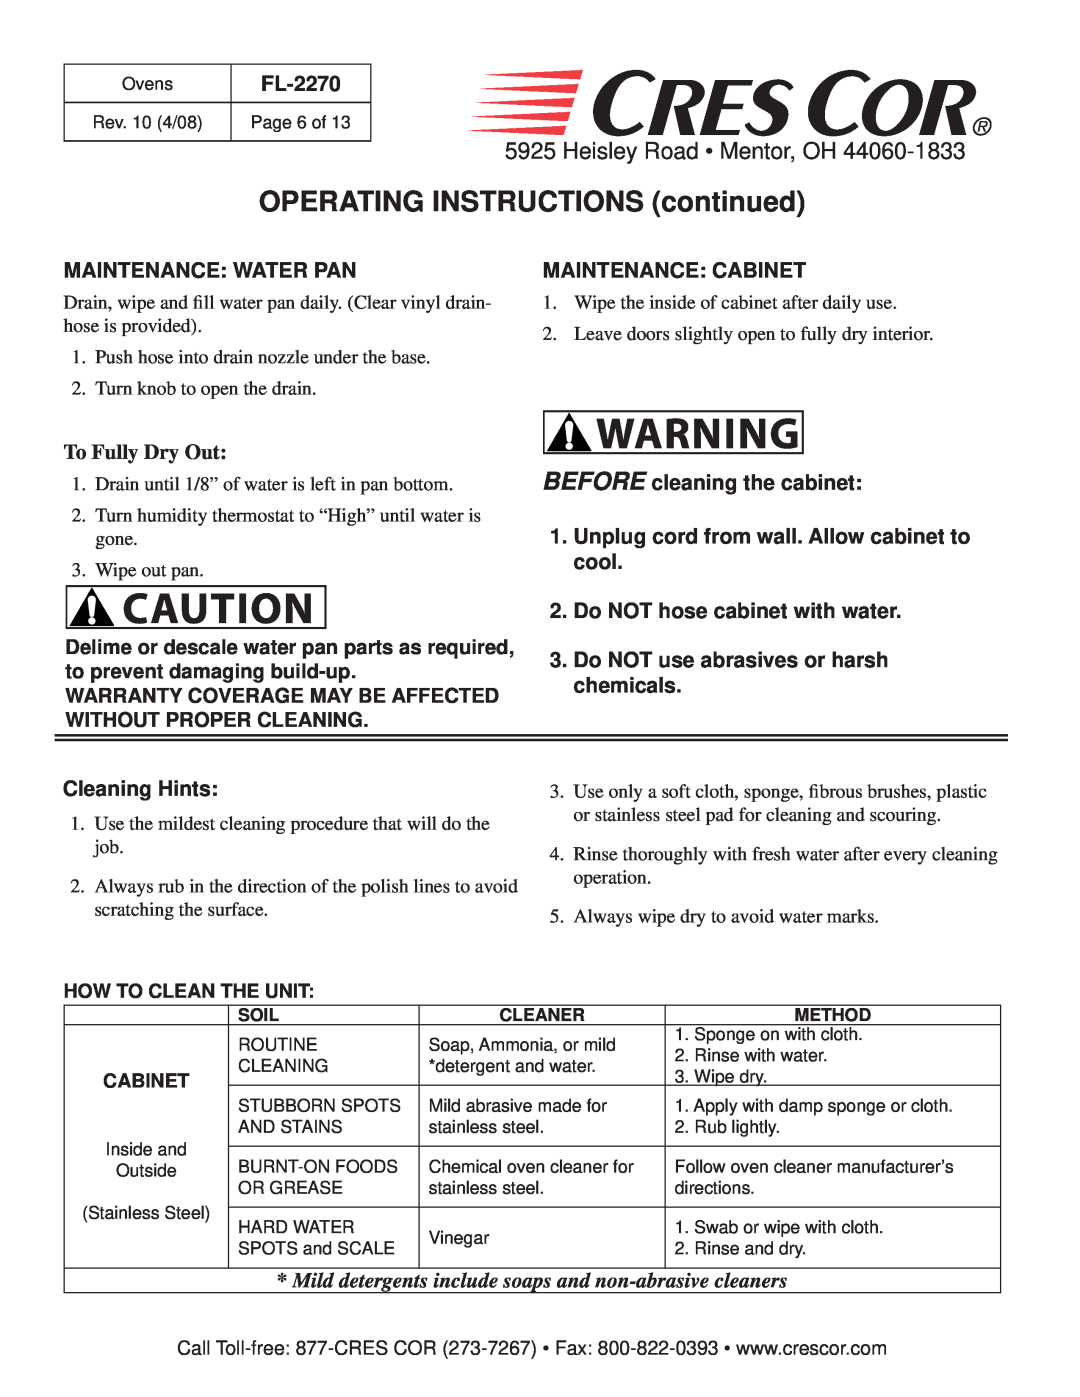 Cres Cor CO151HW189B manual OPERATING INSTRUCTIONS continued, Heisley Road Mentor, OH, FL-2270, Maintenance Water Pan 